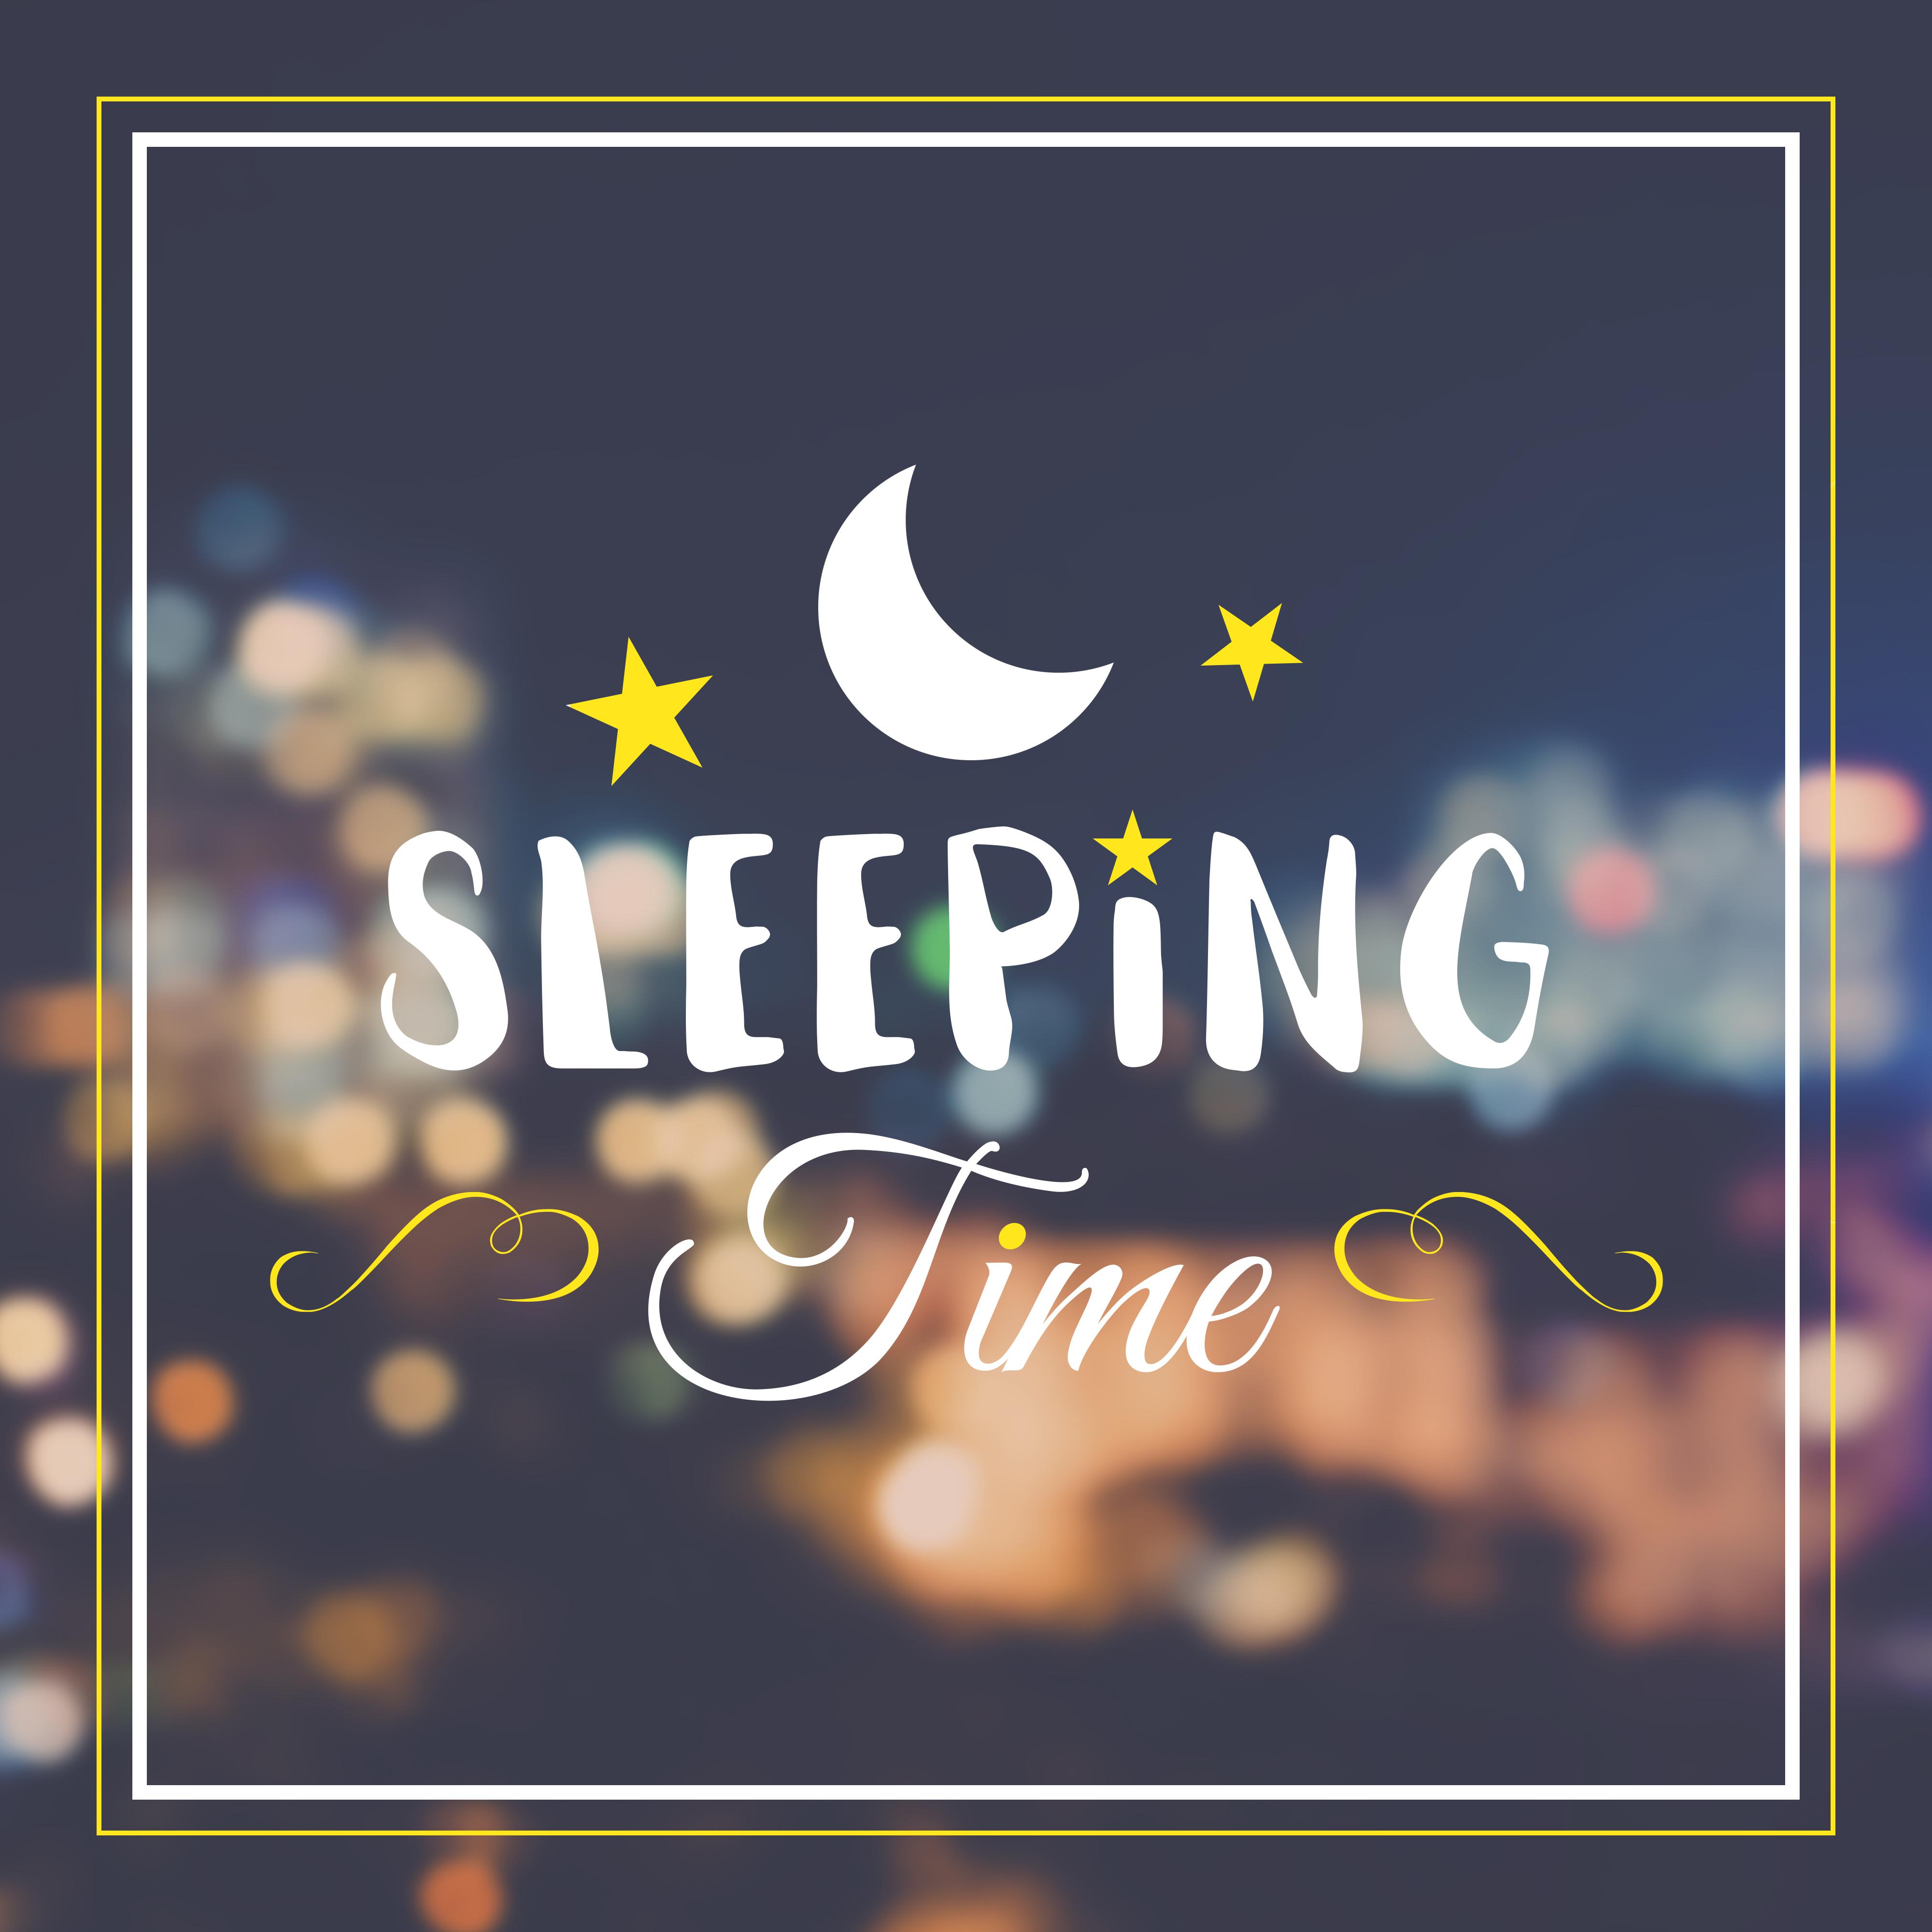 Sleeping Time  Classical Melodies to Sleep and Relaxation, Calm Music to Bed, Quiet Evening with Composers, Gentle Songs